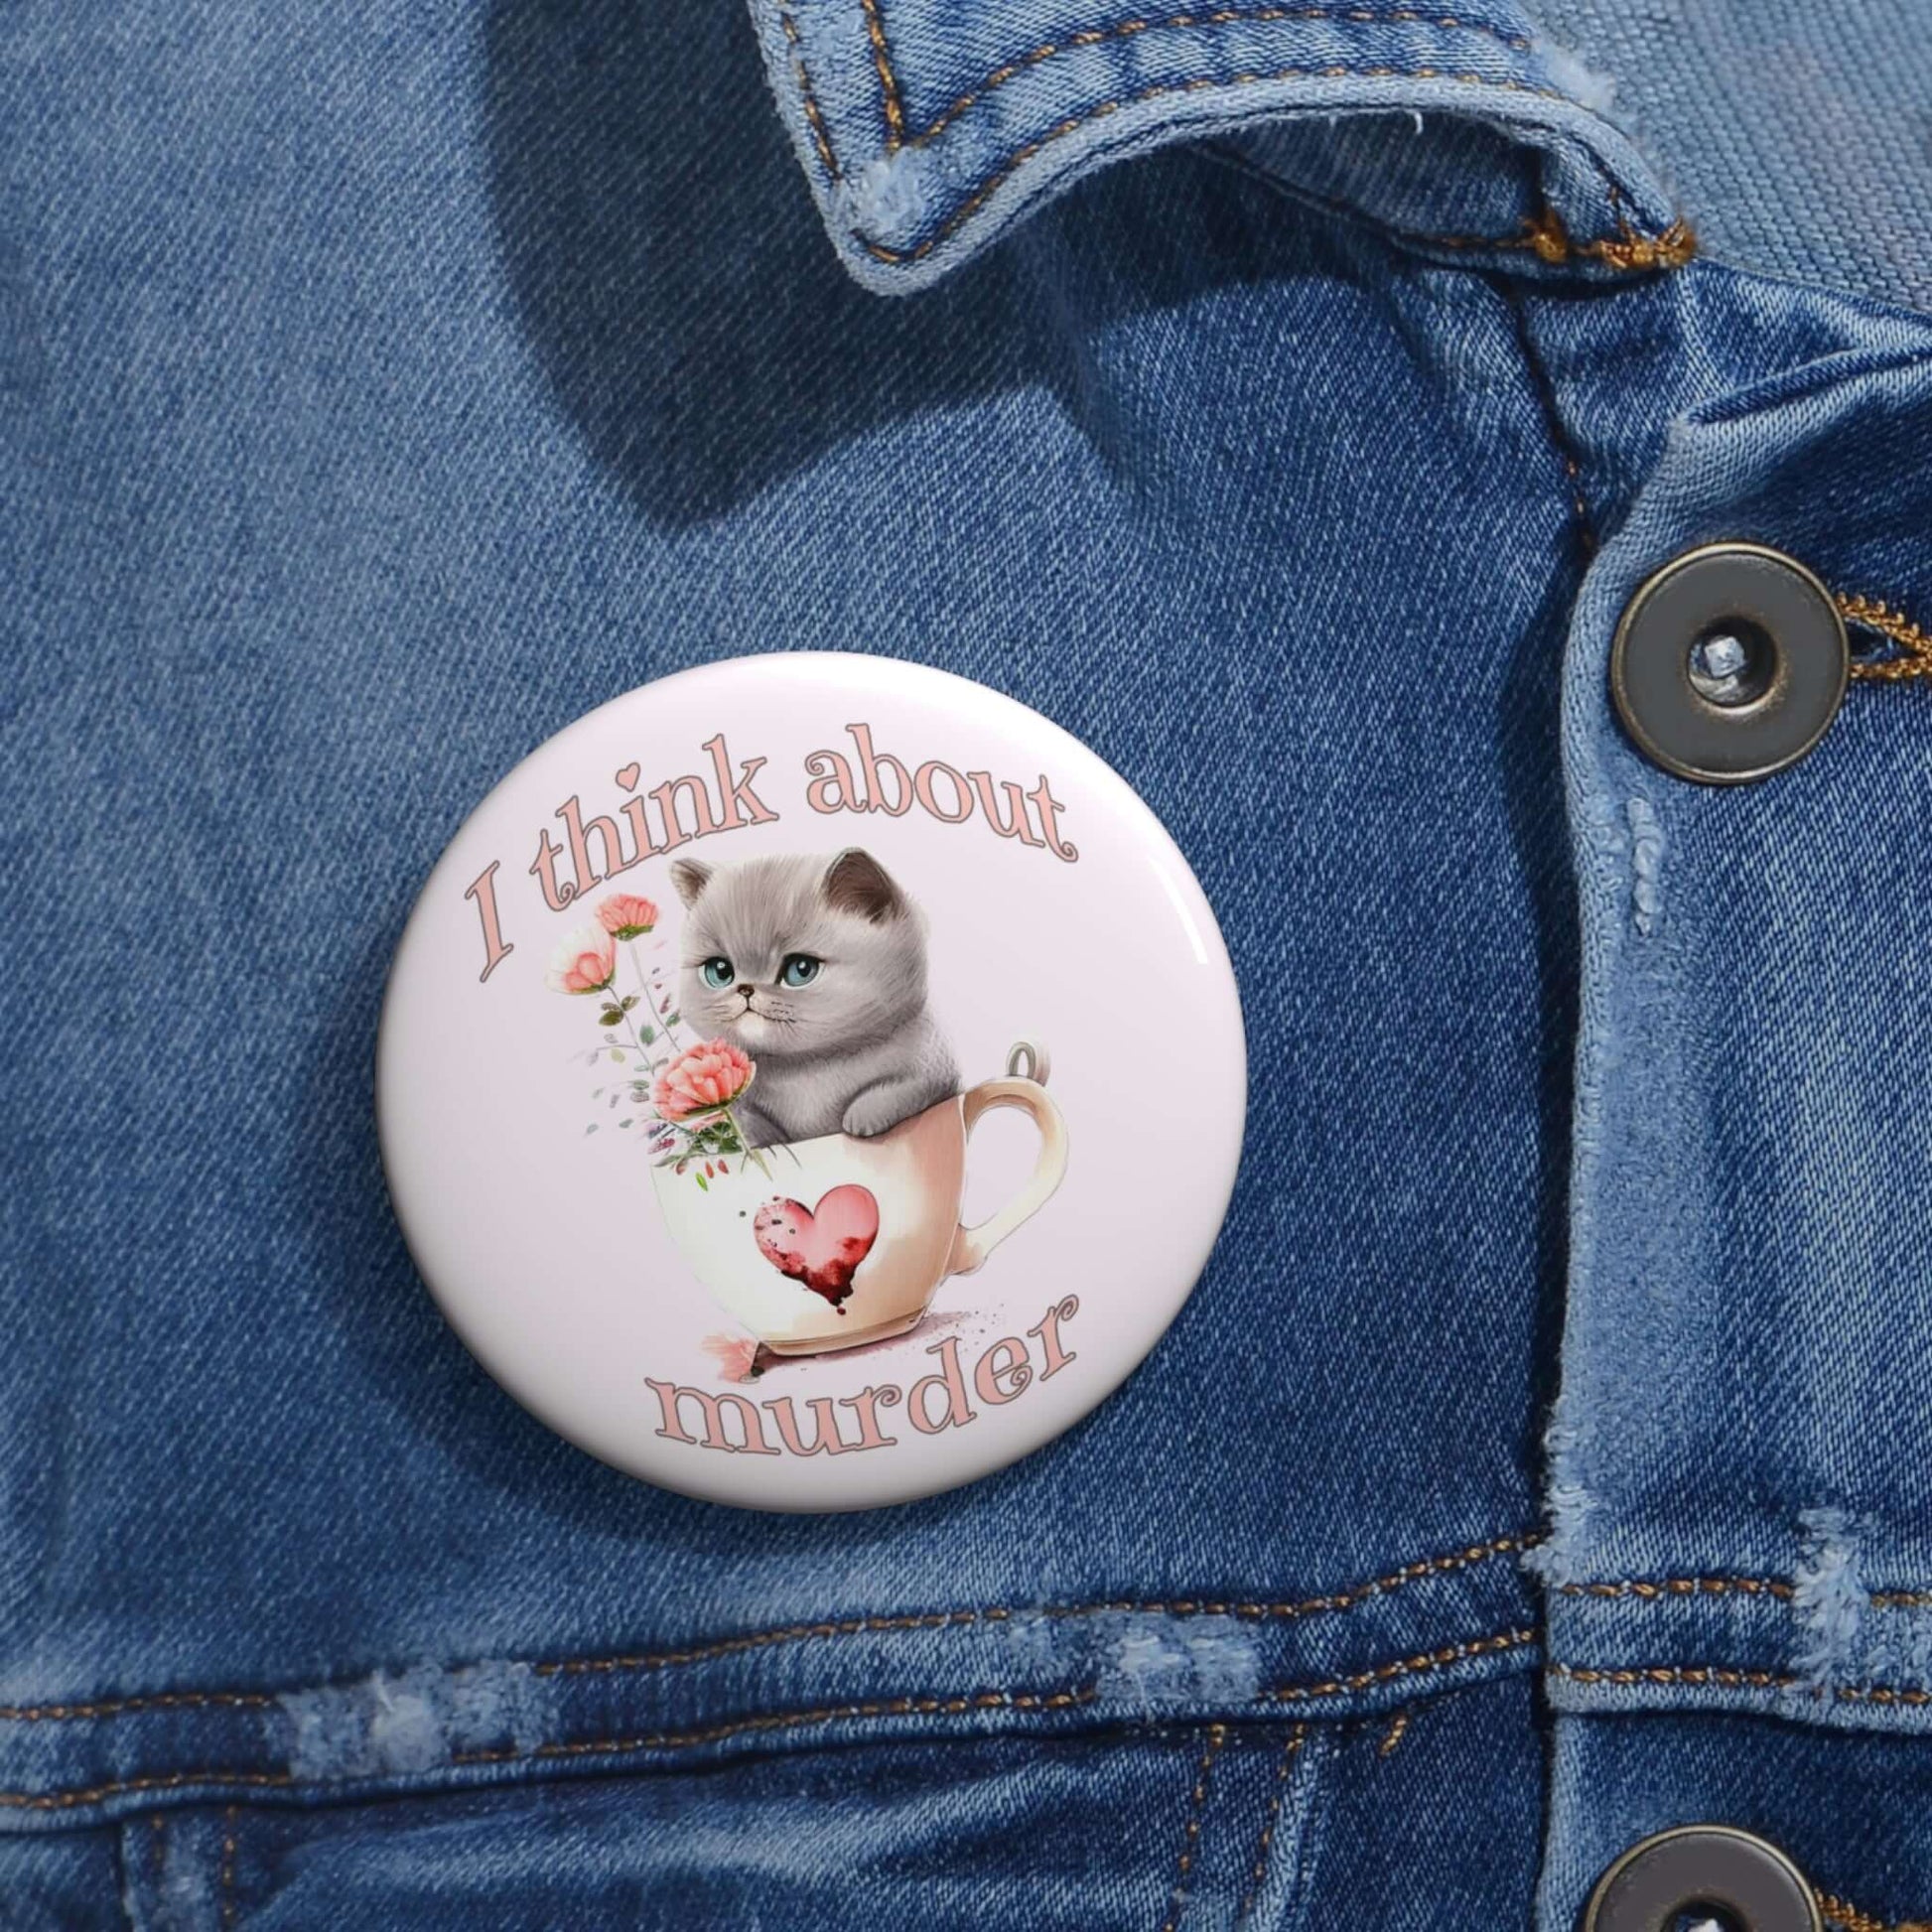 Sarcastic pin-back button that says I think about murder with image of cute fluffy kitten sitting in a teacup.